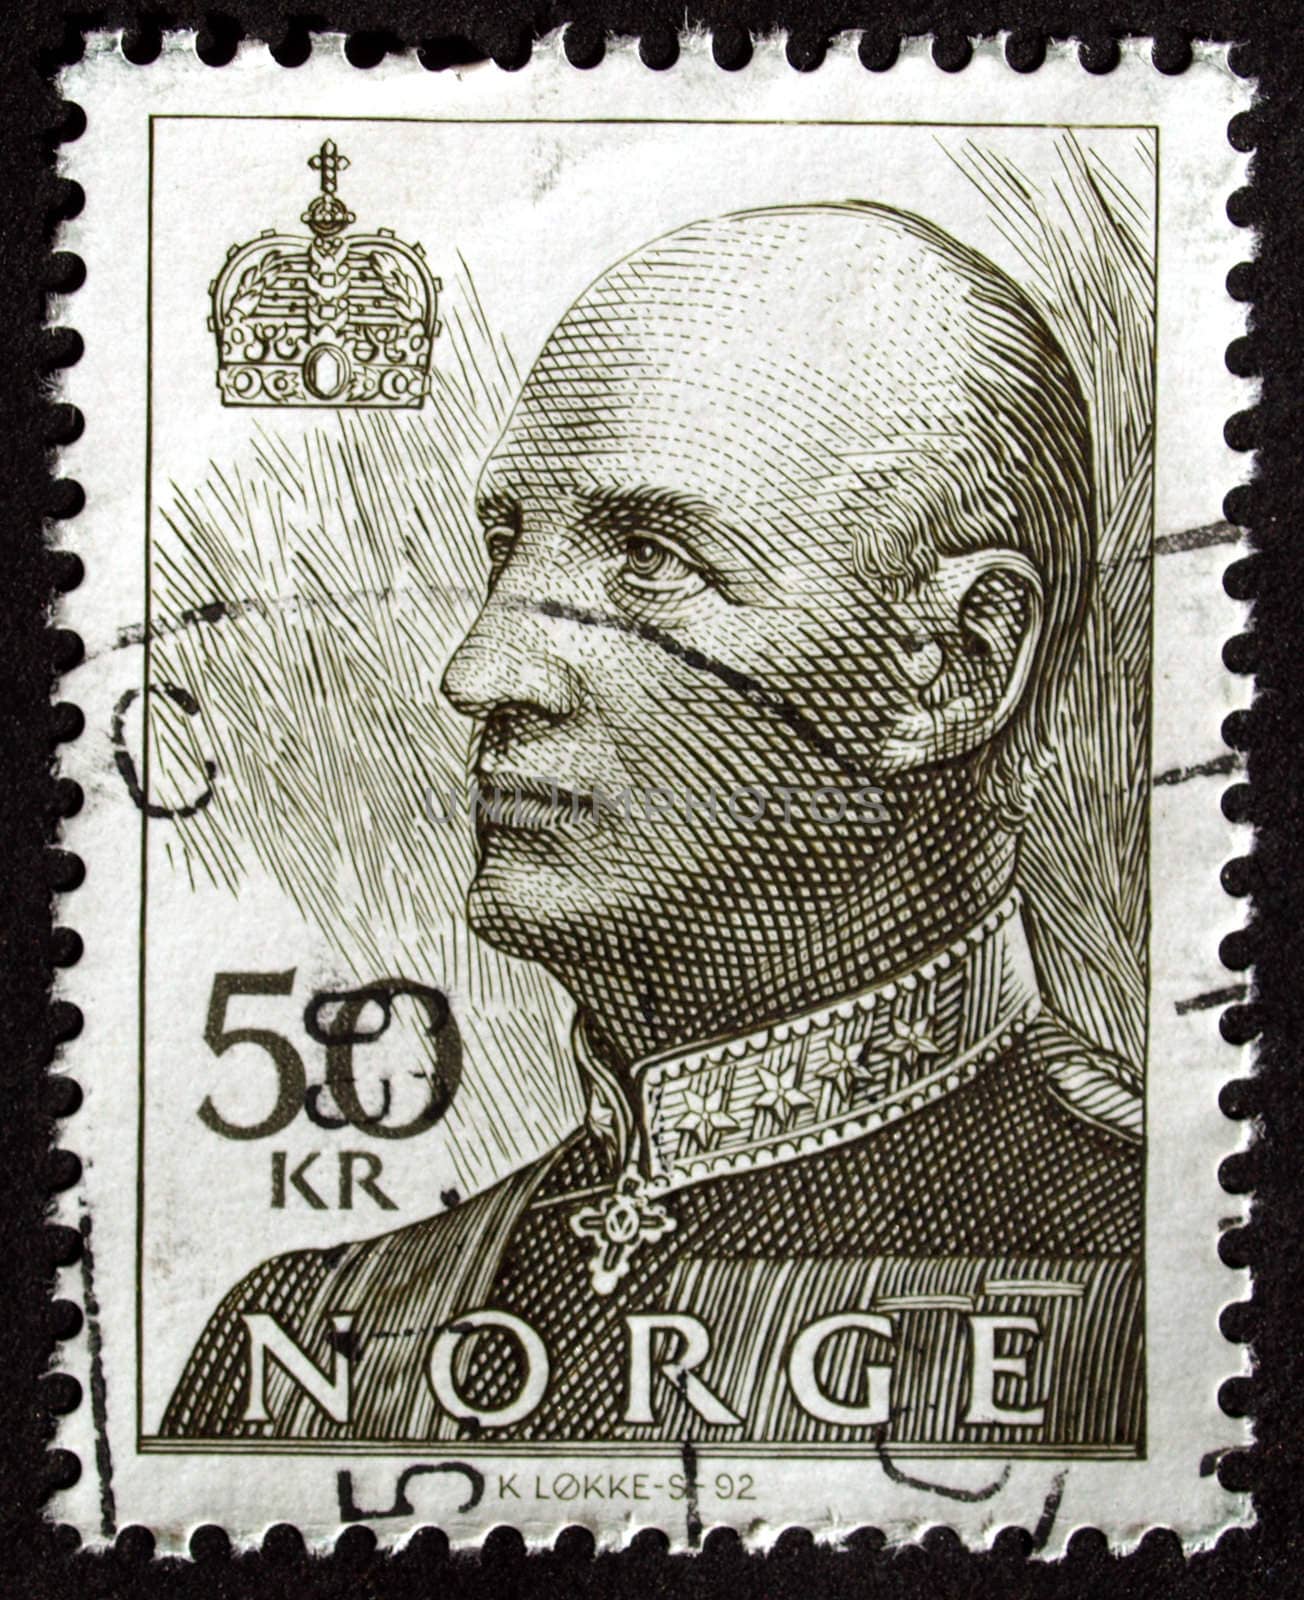 Norwegian postage stamp from Norway